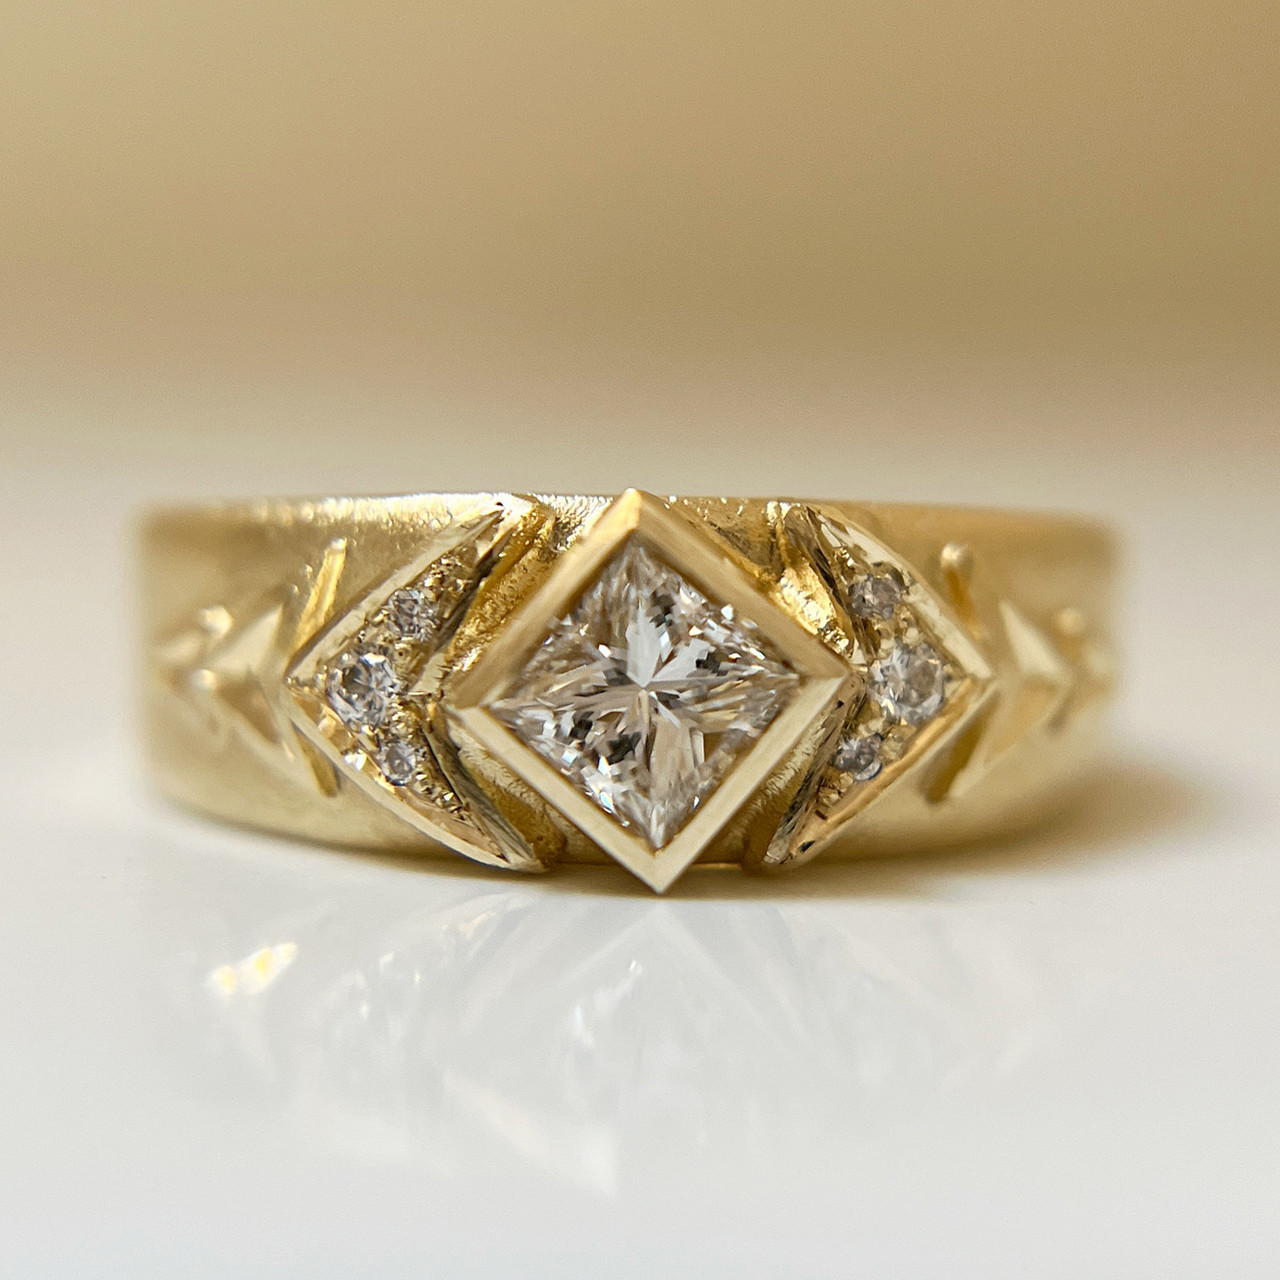 Square Diamond Reflections Ring, Claire Macfarlane, tomfoolery